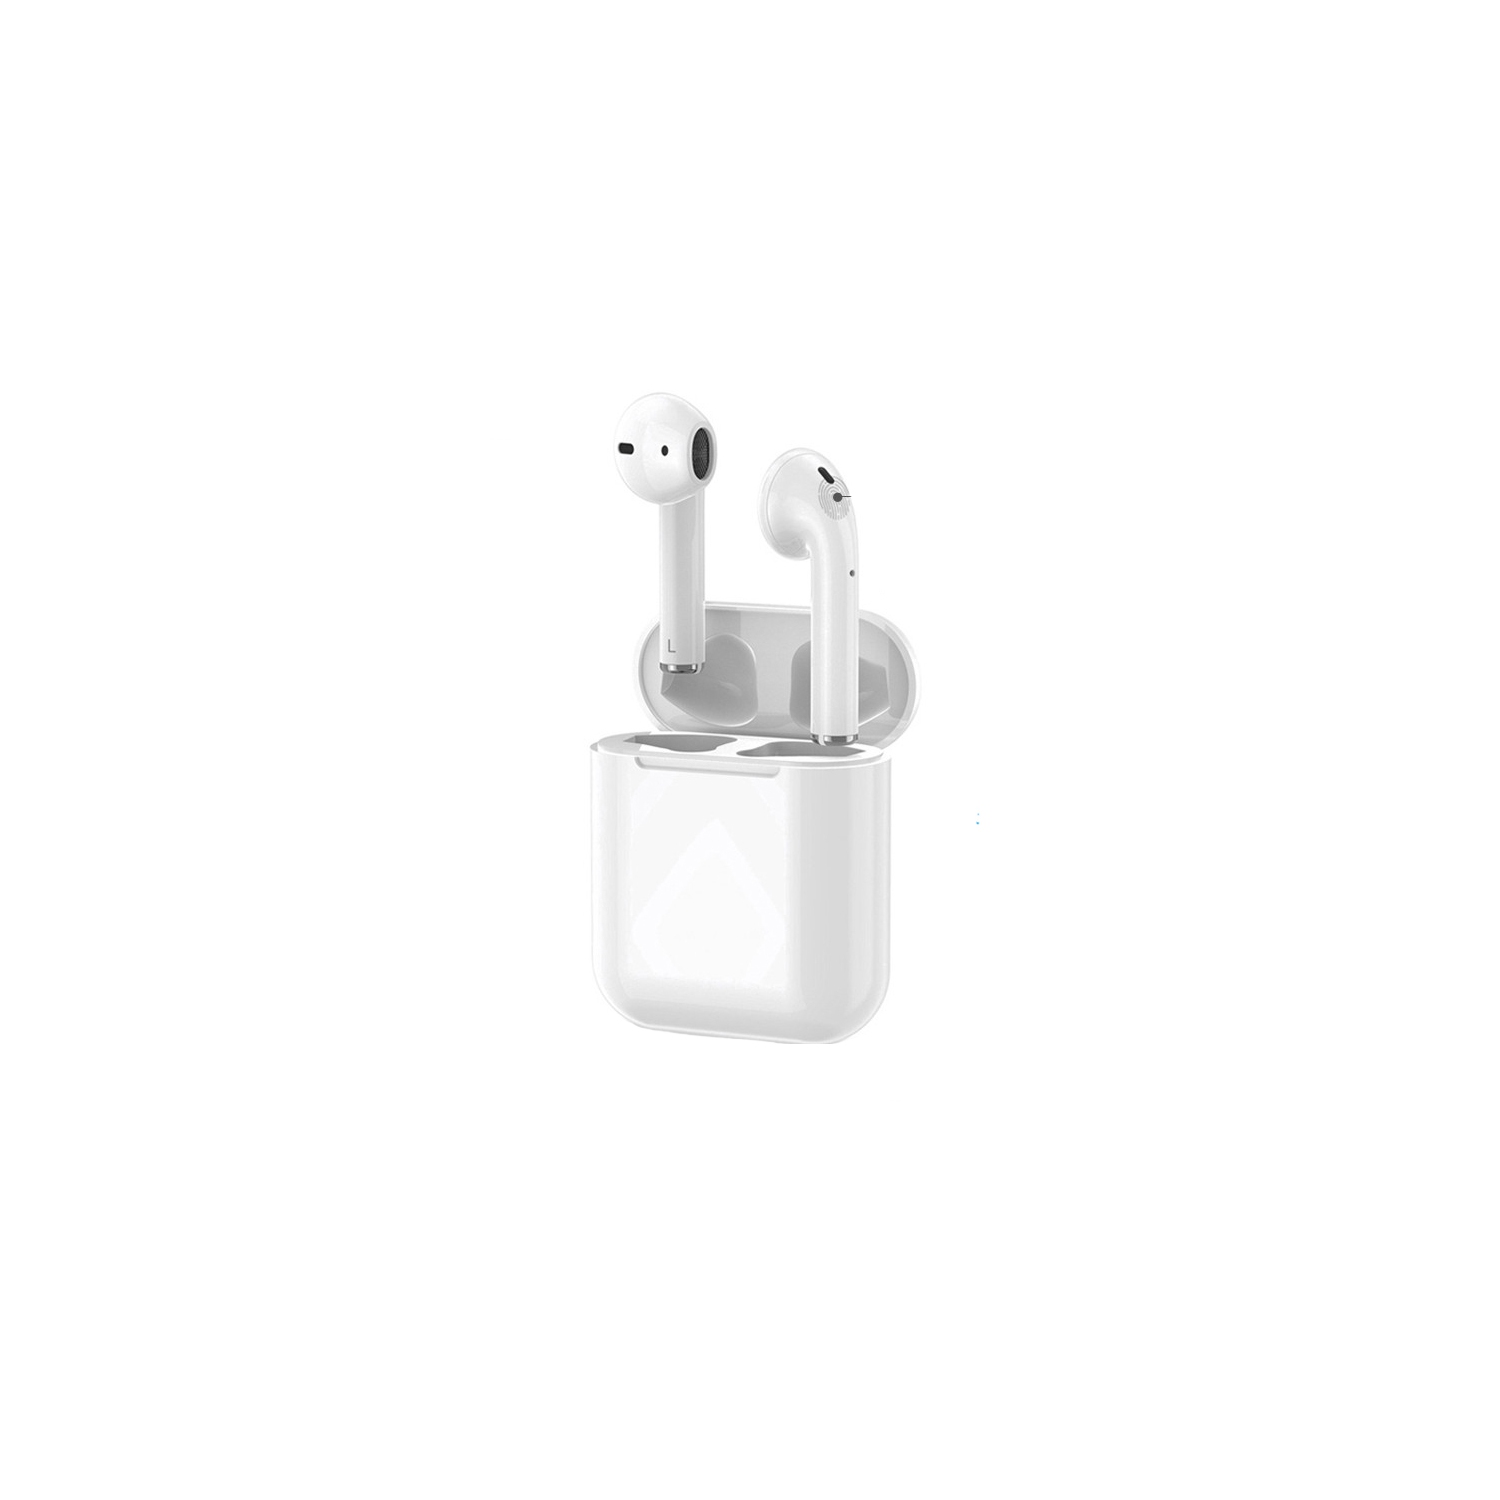 i18 Wireless in-Ear Sport Bluetooth 5.0 Headphone Distance Up To 50ft For Android Smartphones iPhone iPod iPad - White